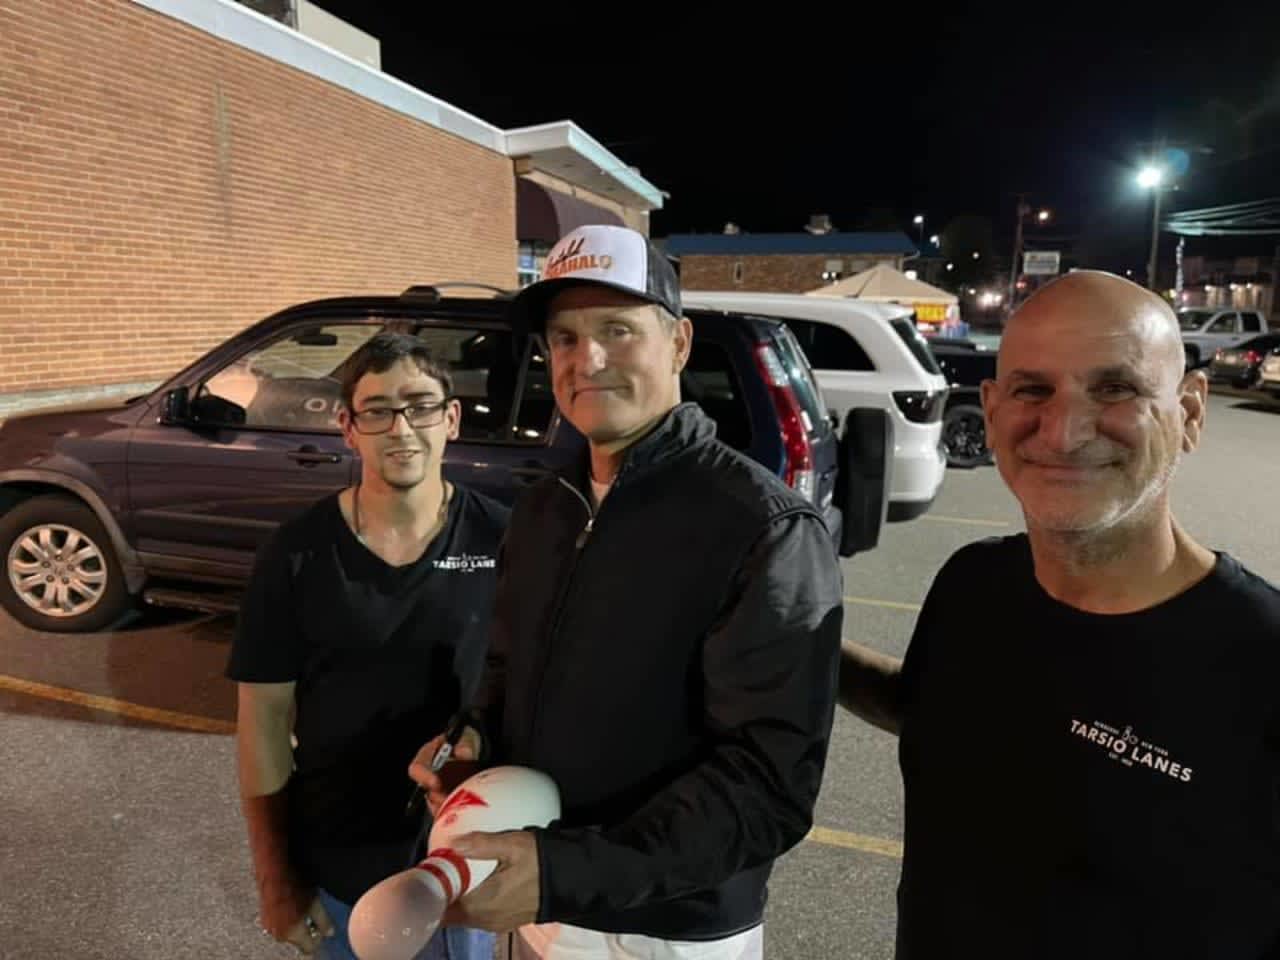 Woody Harrelson with Larry Perlitz and fans at the bowling alley.